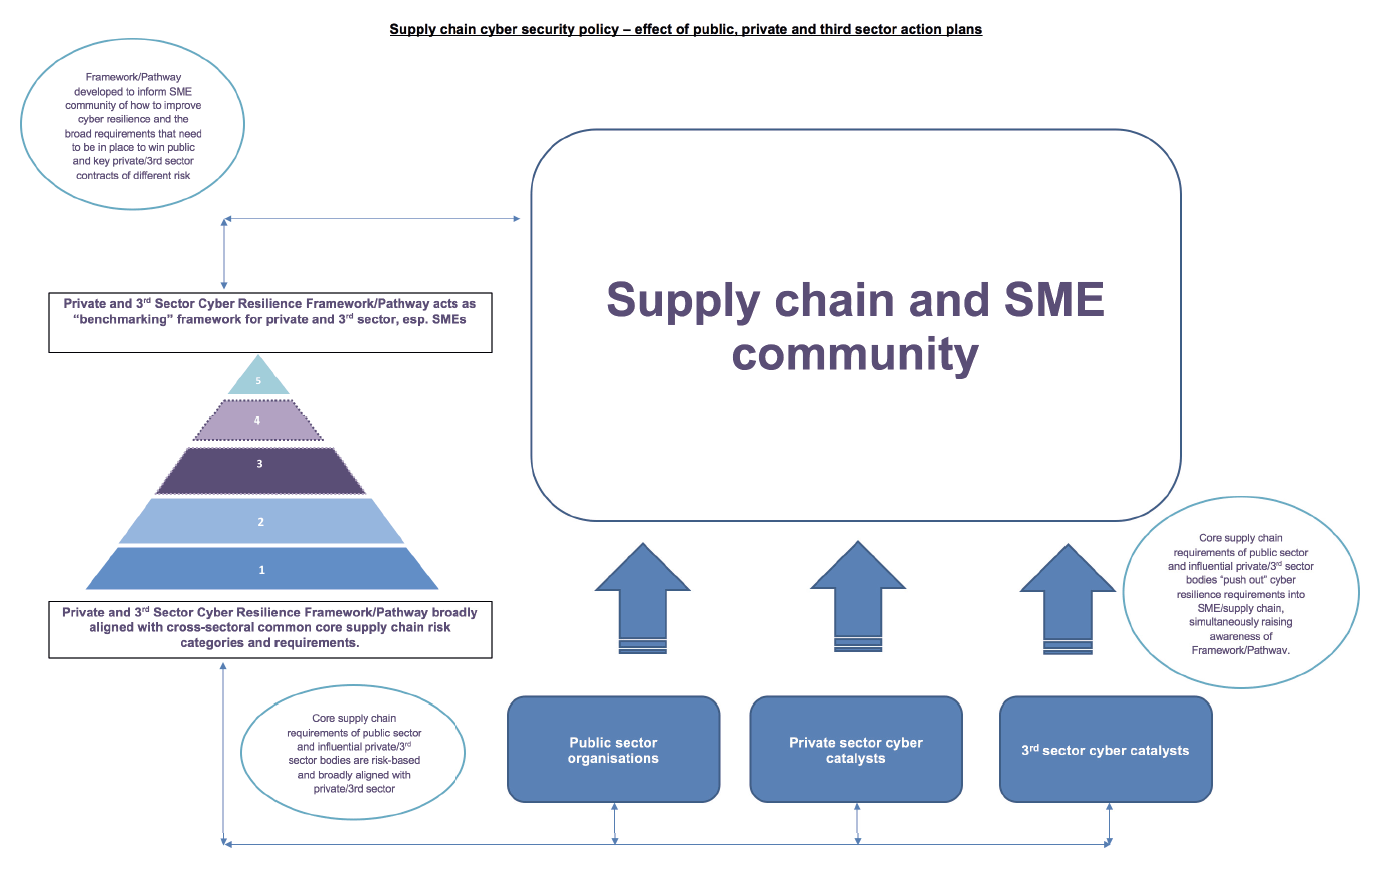 Annex C – Supply chain cyber security policies – driving good practice through Scotland’s SME community (concept)